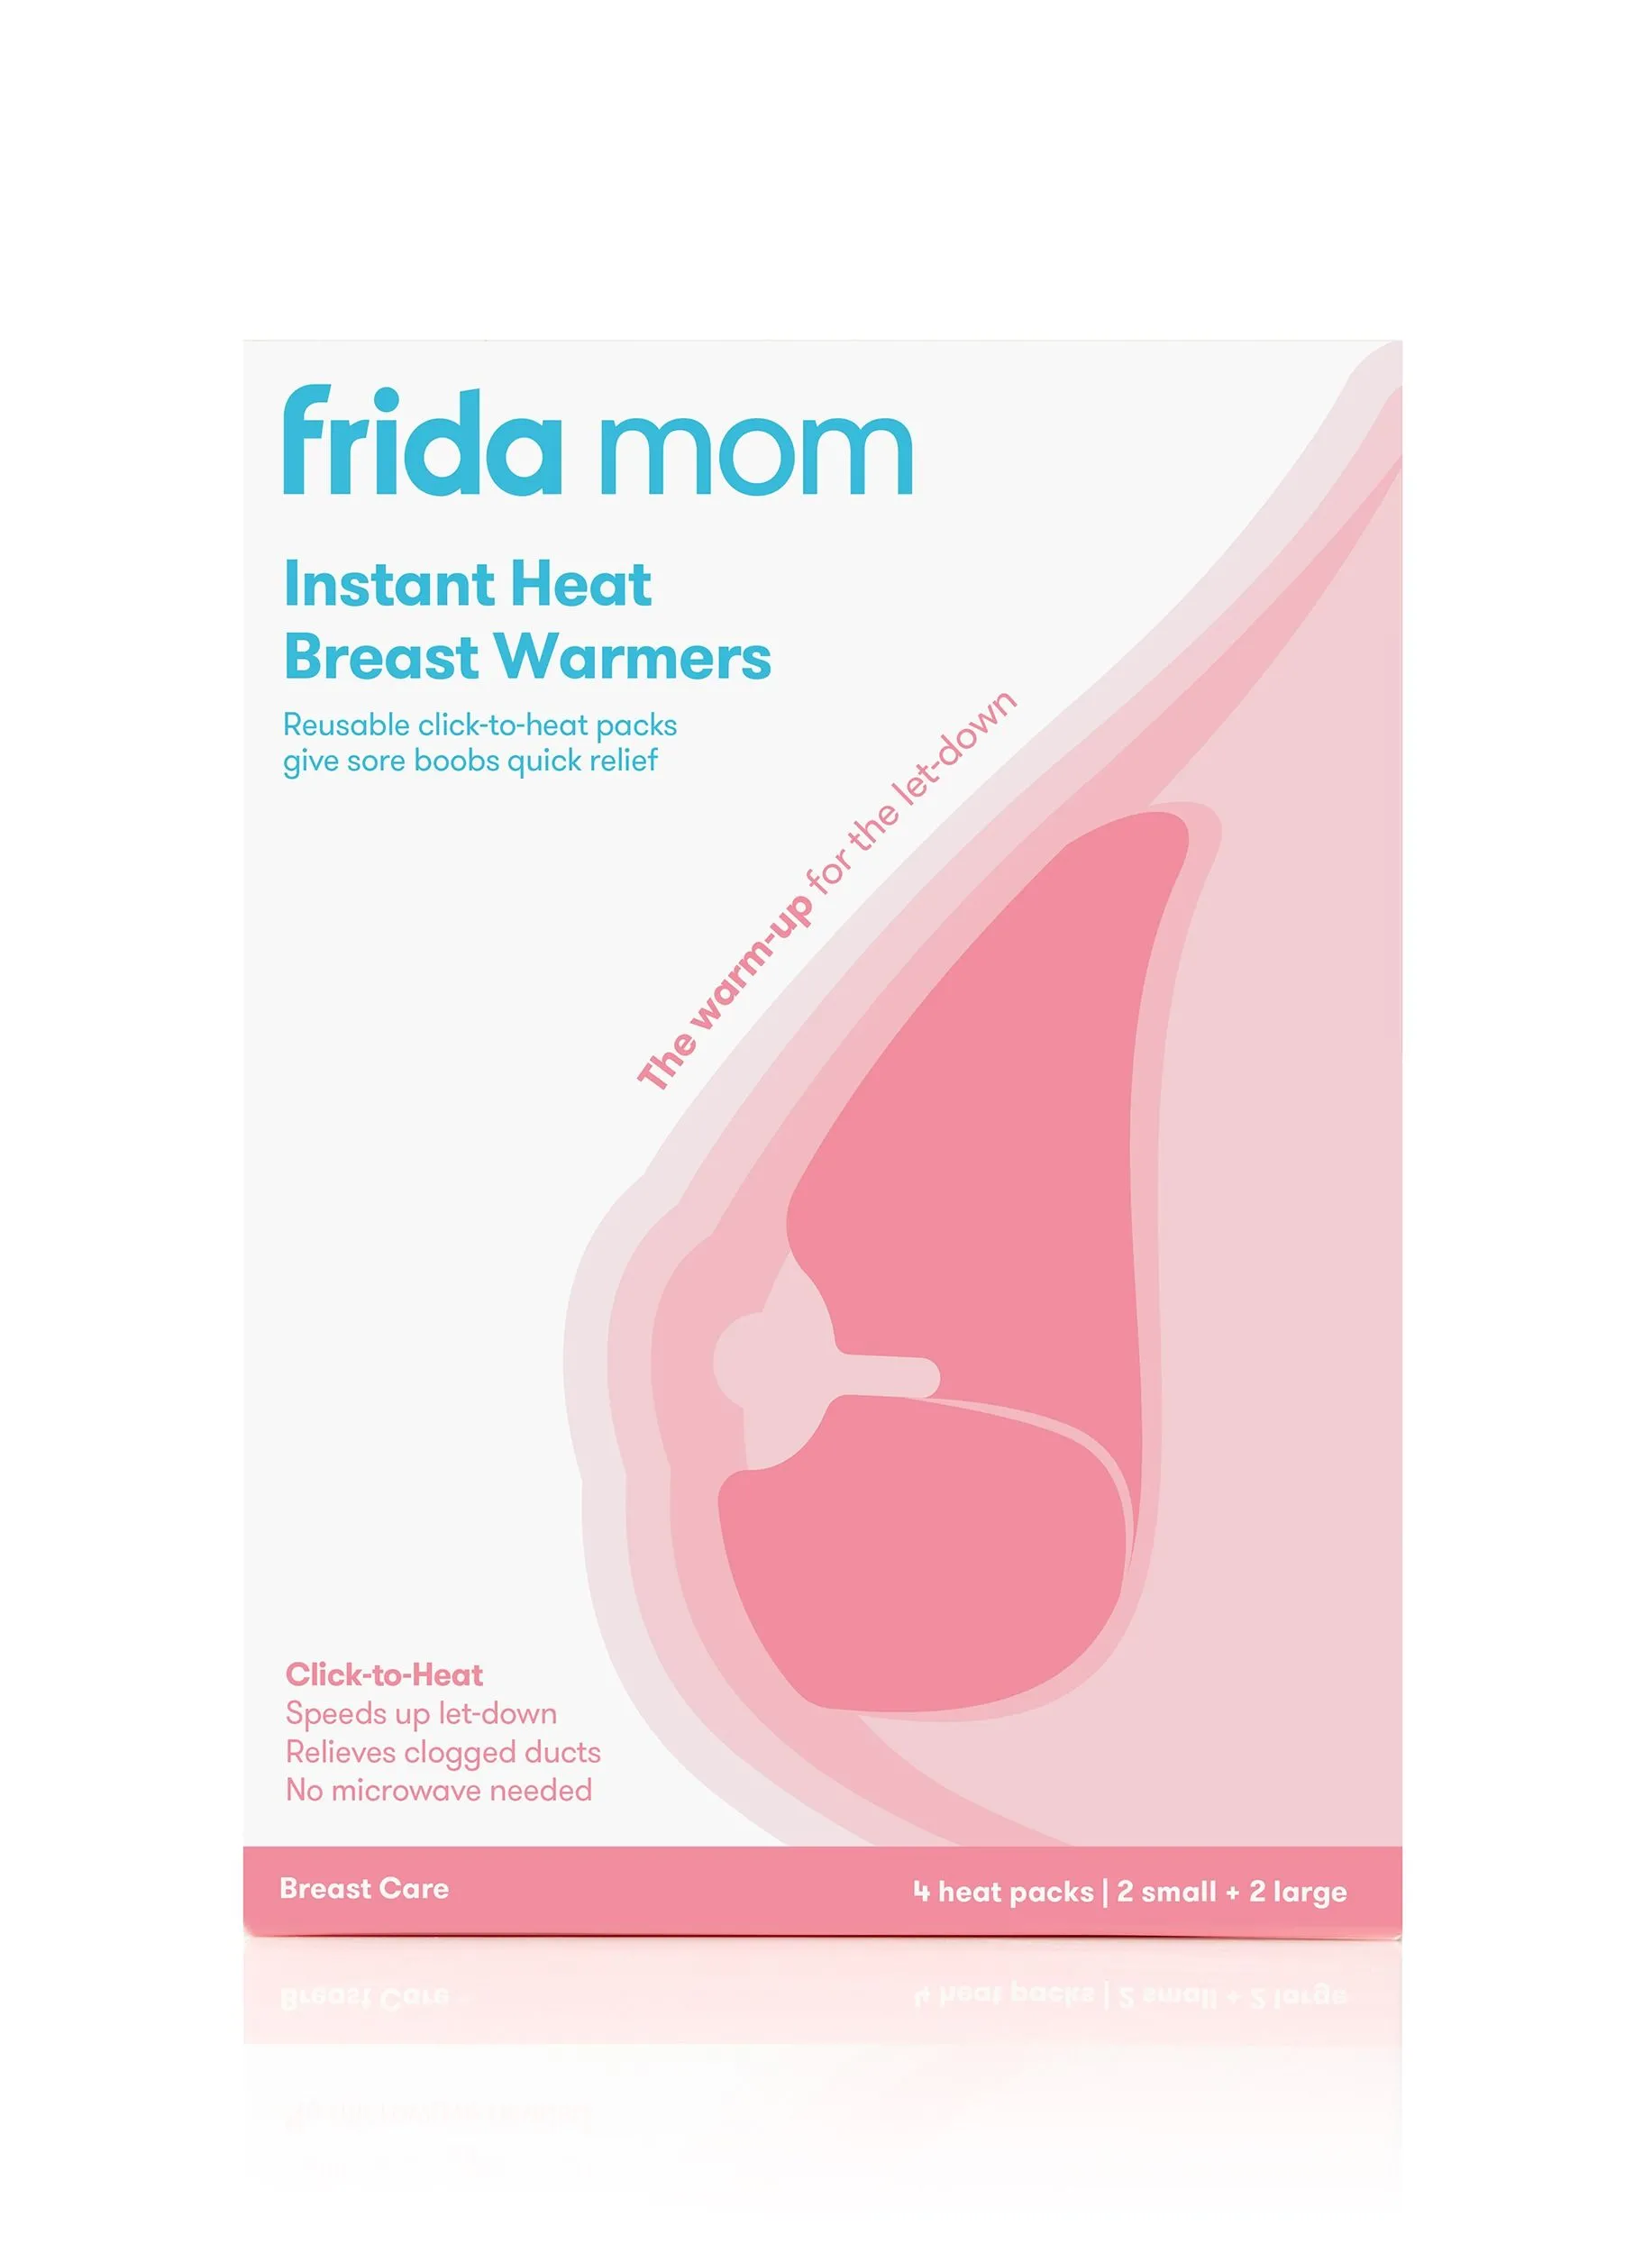 frida mom Frida Mom Instant Heat Reusable Breast Warmers - Reusable Click-to-Heat Relief in an Instant for Nursing + Pumping Moms - 2 Sets - 2 Small + 2 Large Heat Packs